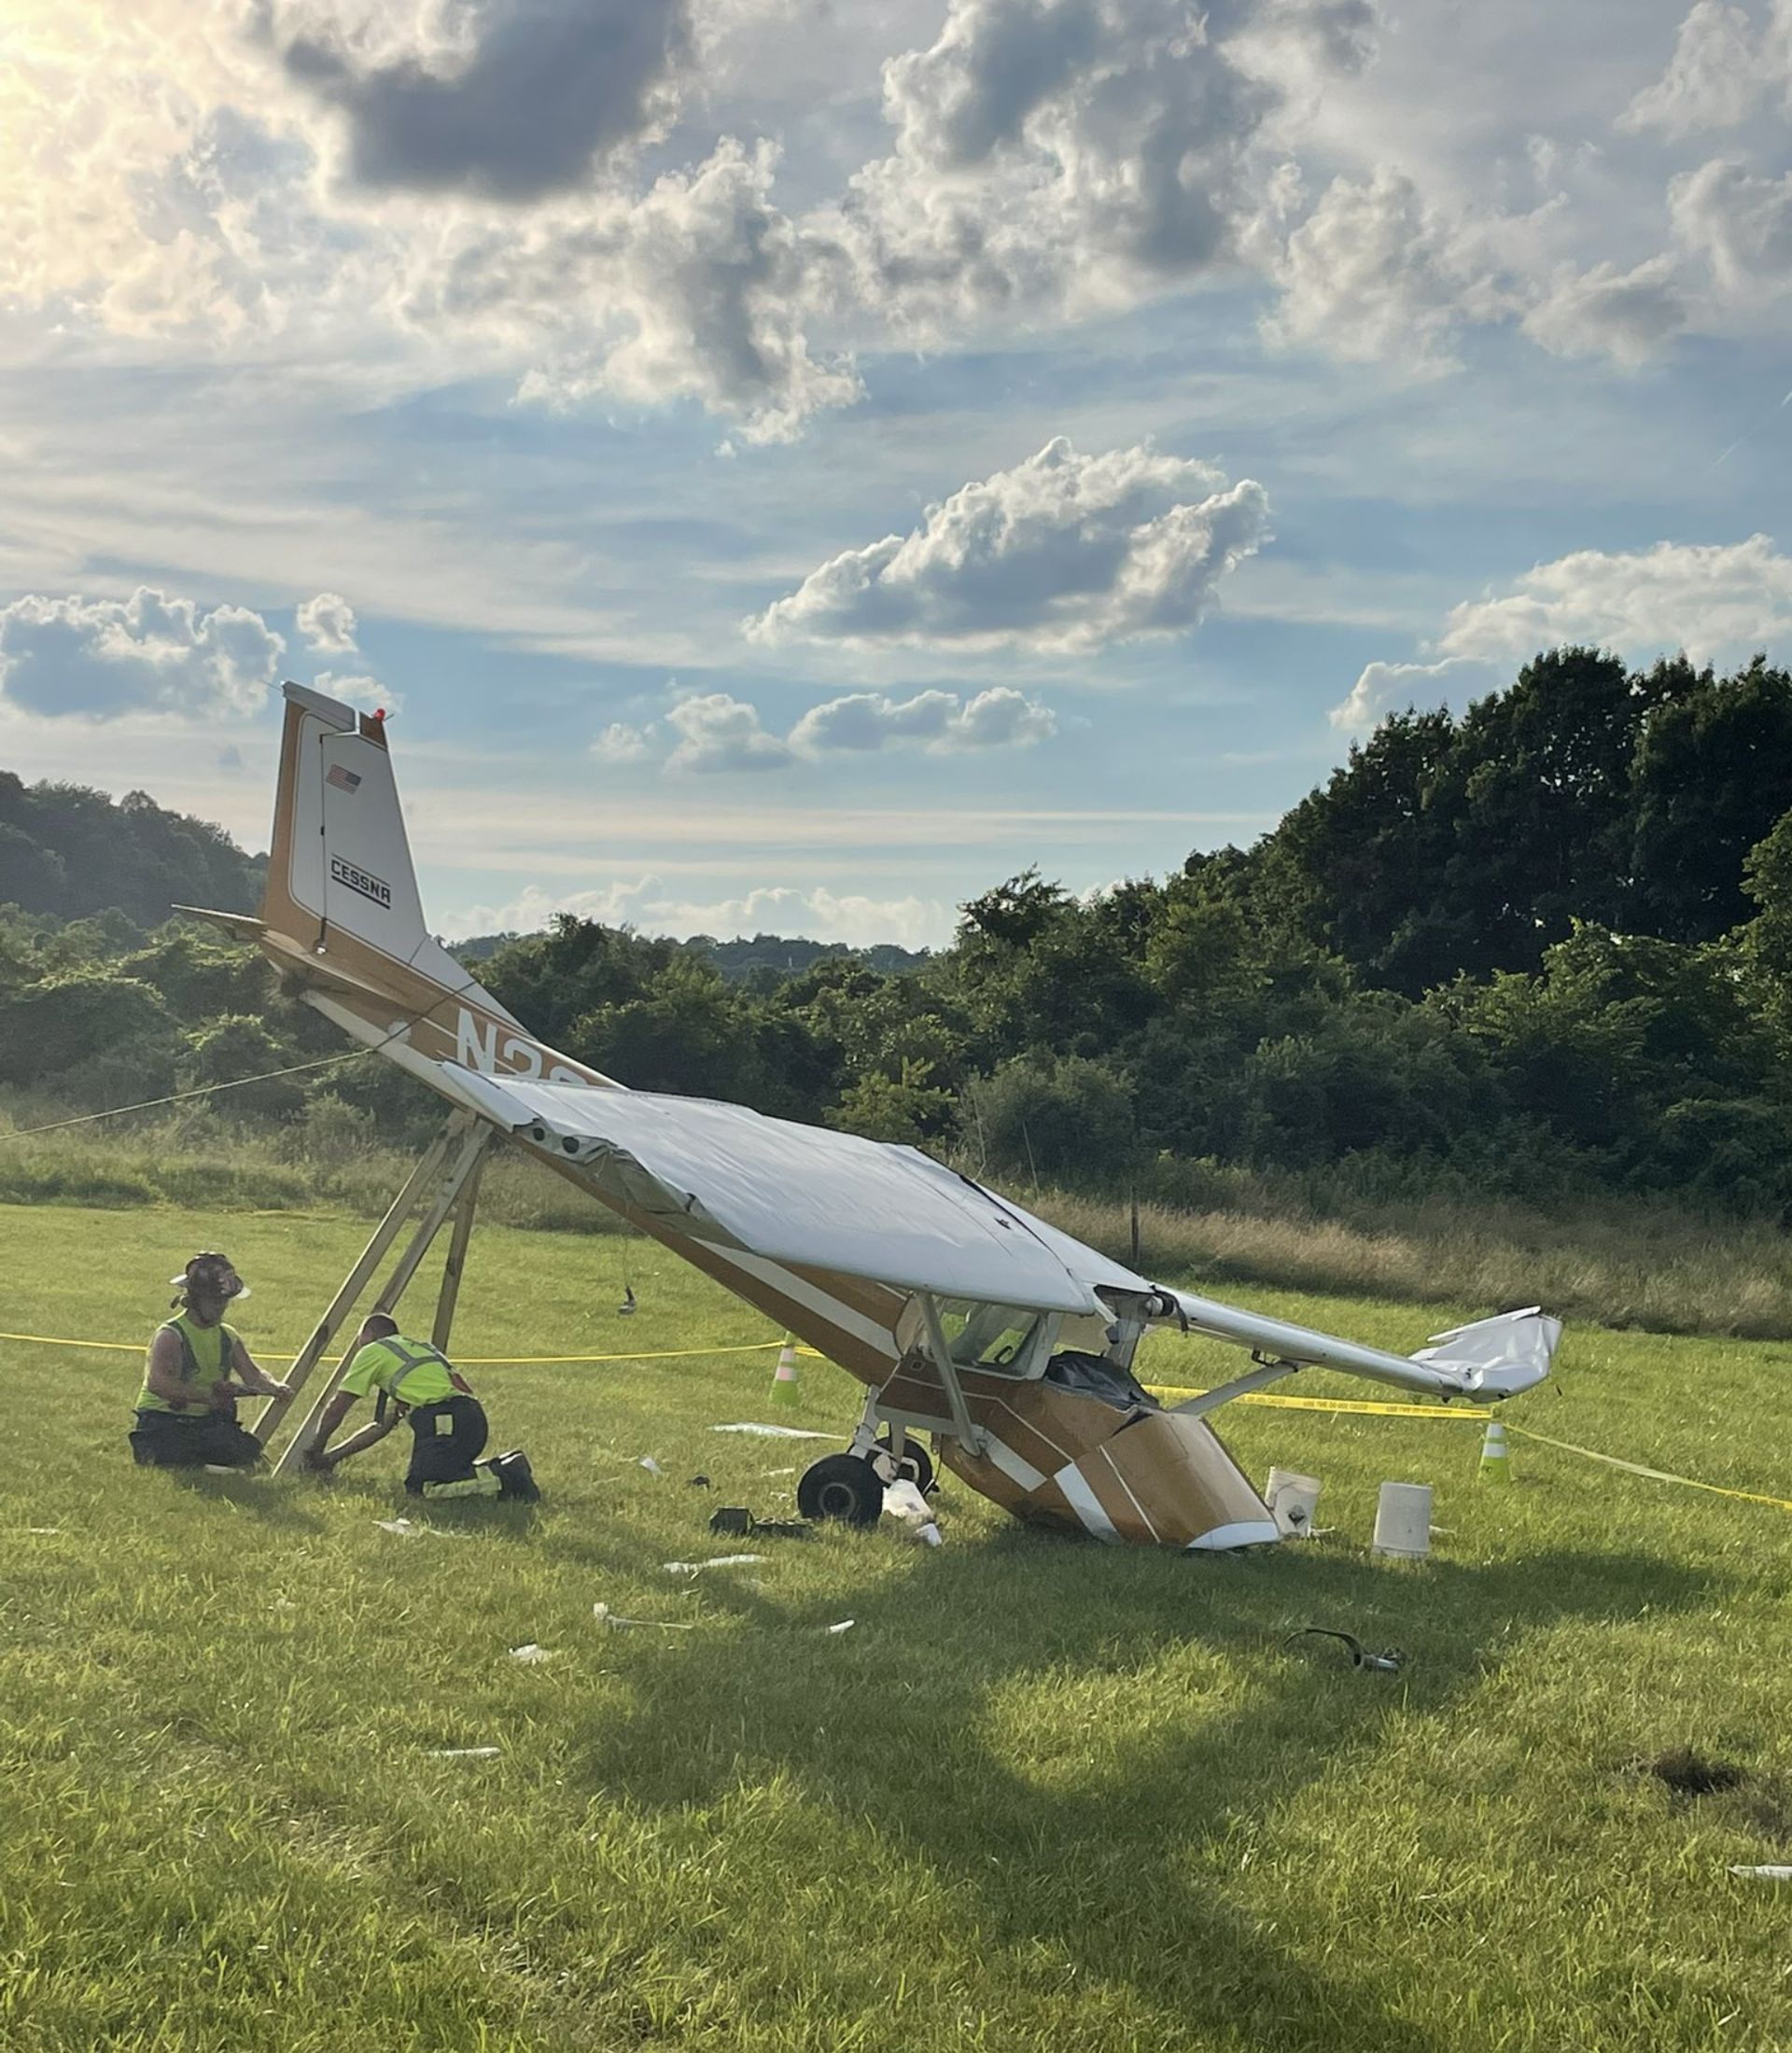 a plane with a broken wing sits in a grassy field